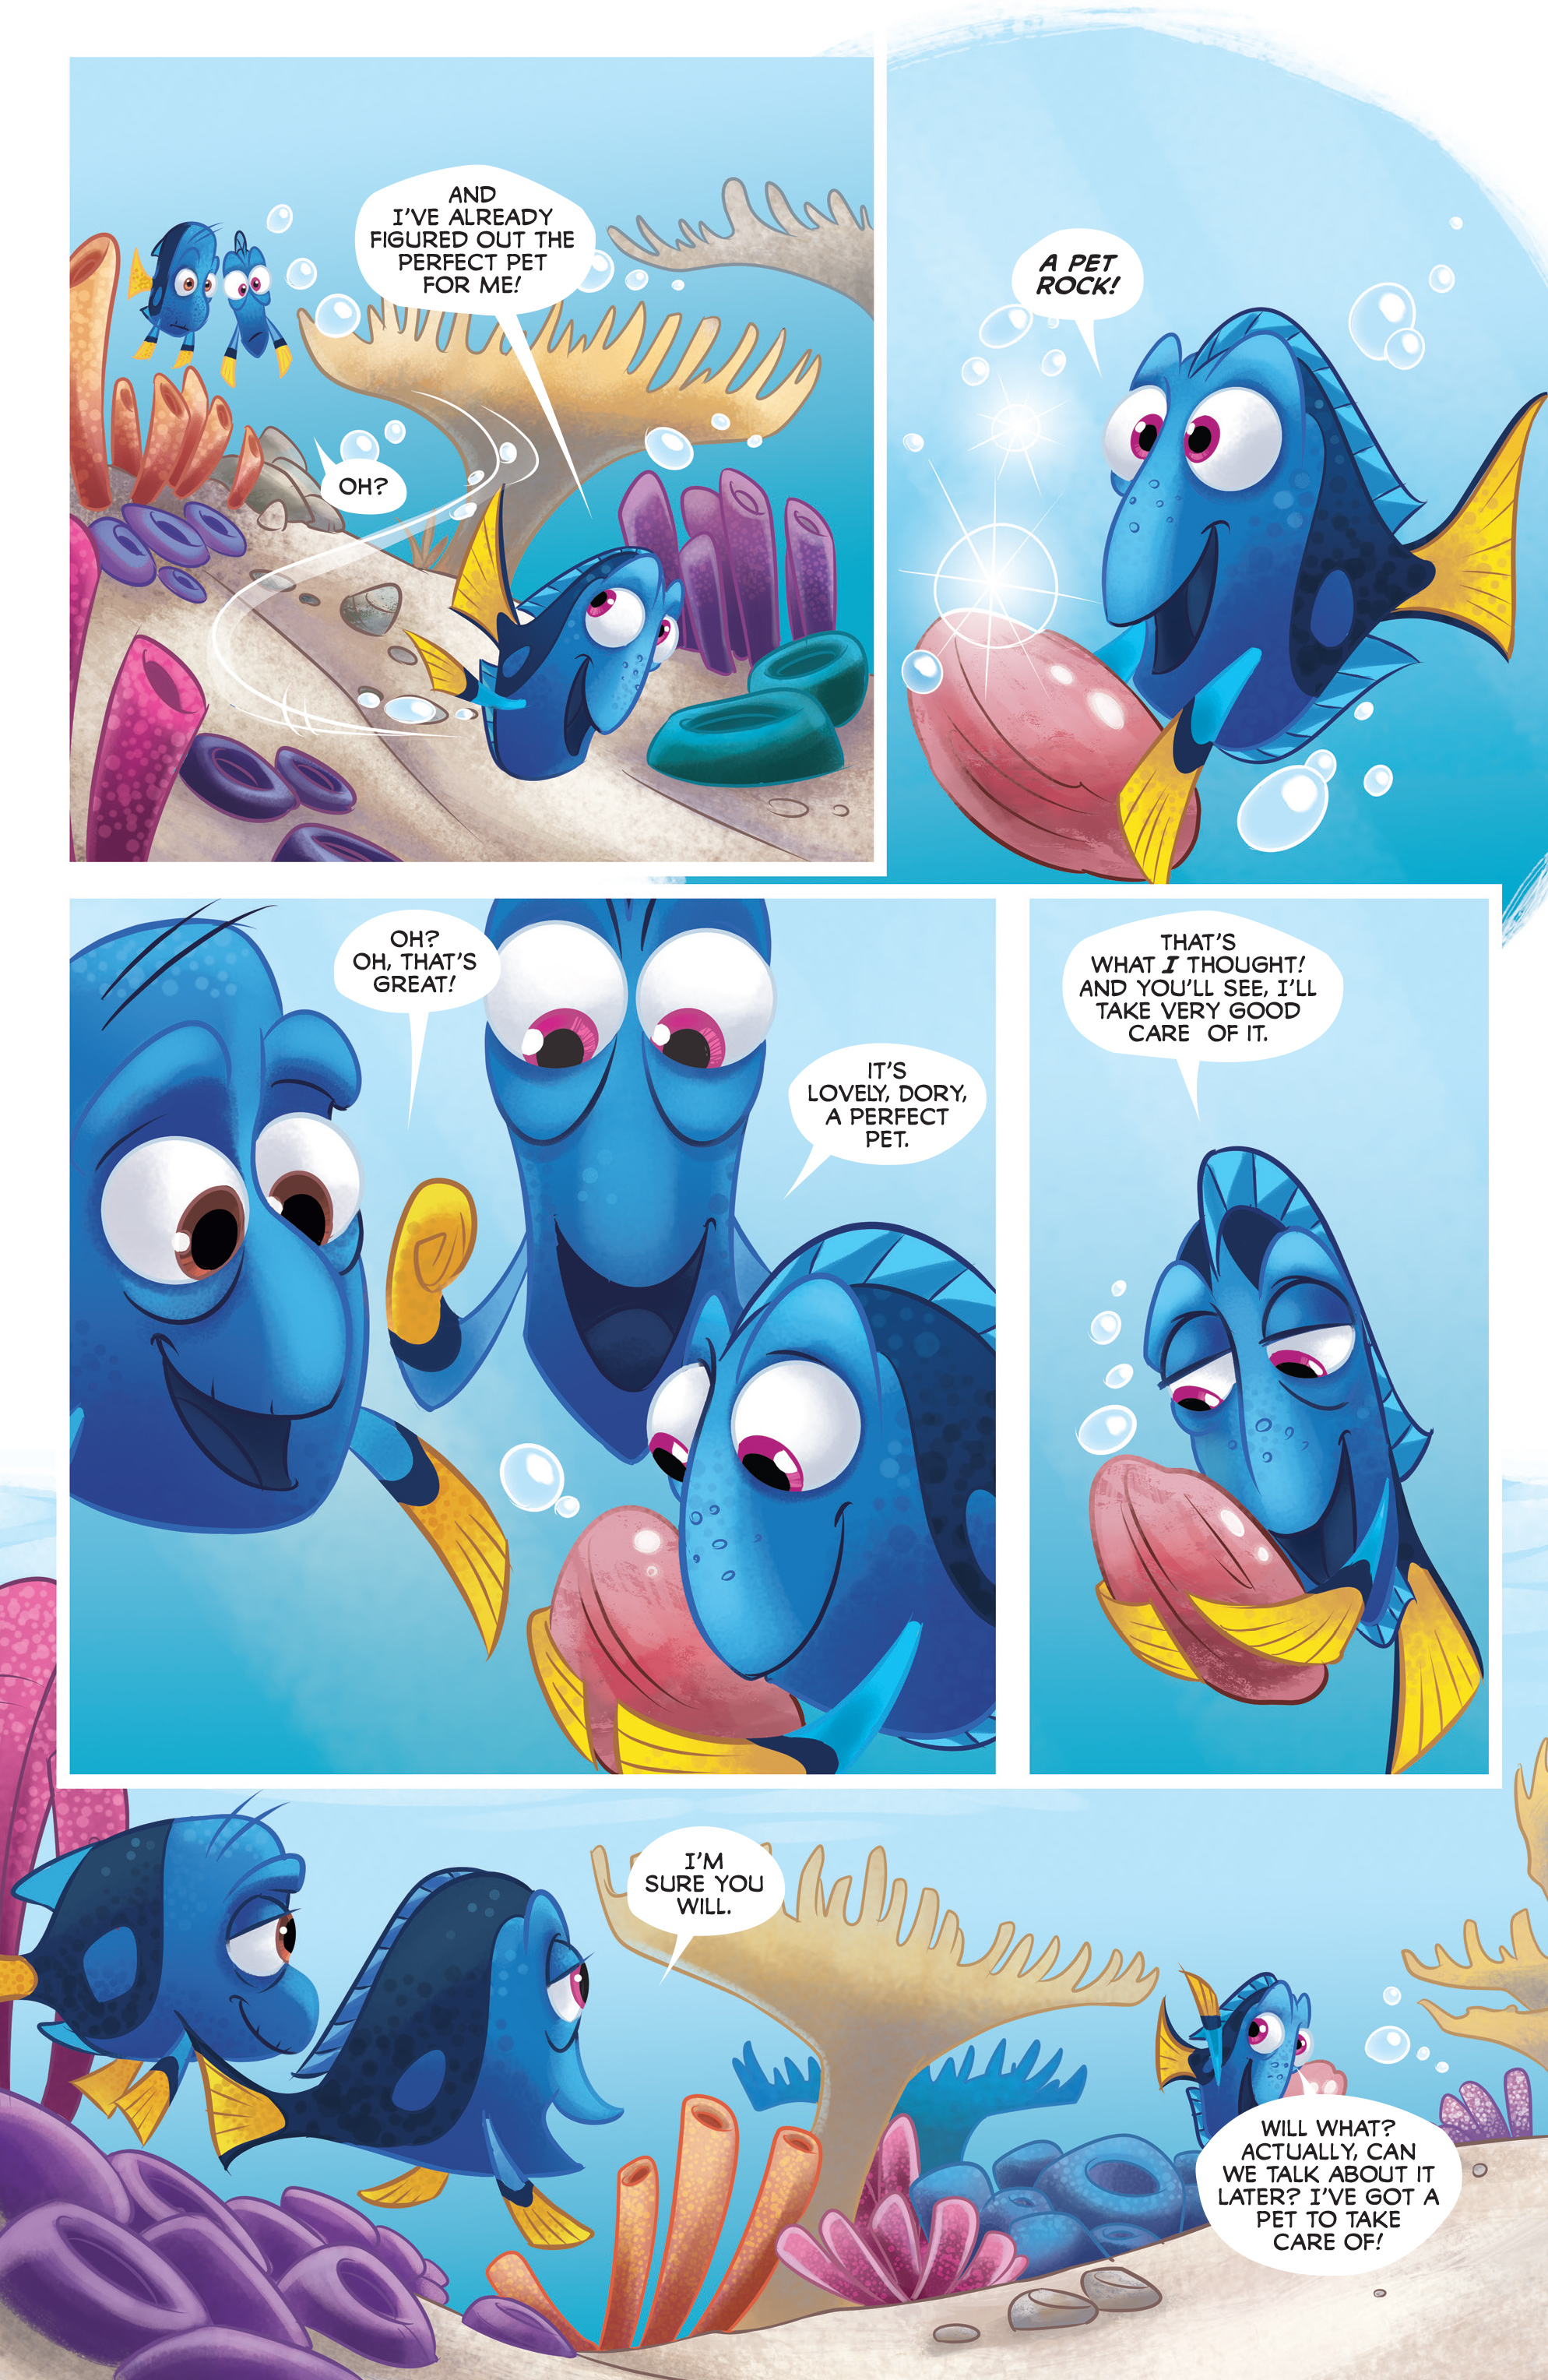 1988px x 3056px - Disney Pixar Finding Dory Issue 2 | Read Disney Pixar Finding Dory Issue 2  comic online in high quality. Read Full Comic online for free - Read comics  online in high quality .| READ COMIC ONLINE